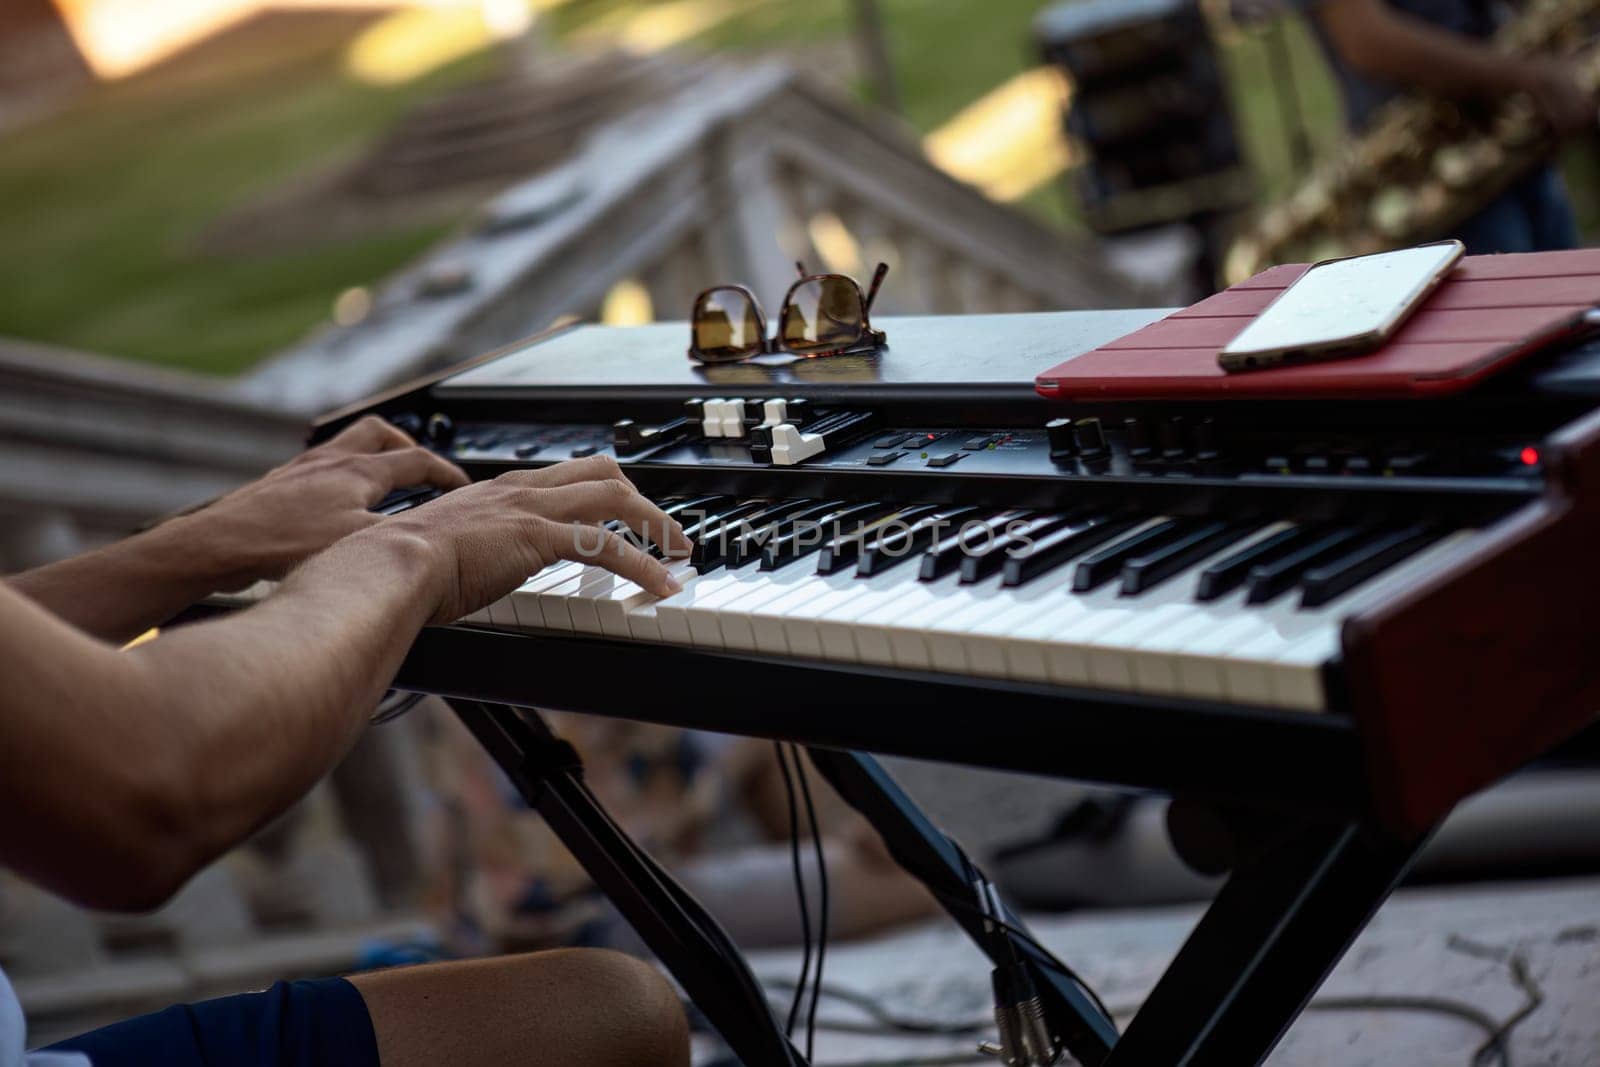 Close-up of a pianist's hands skillfully playing the keyboard during a live daylight performance.